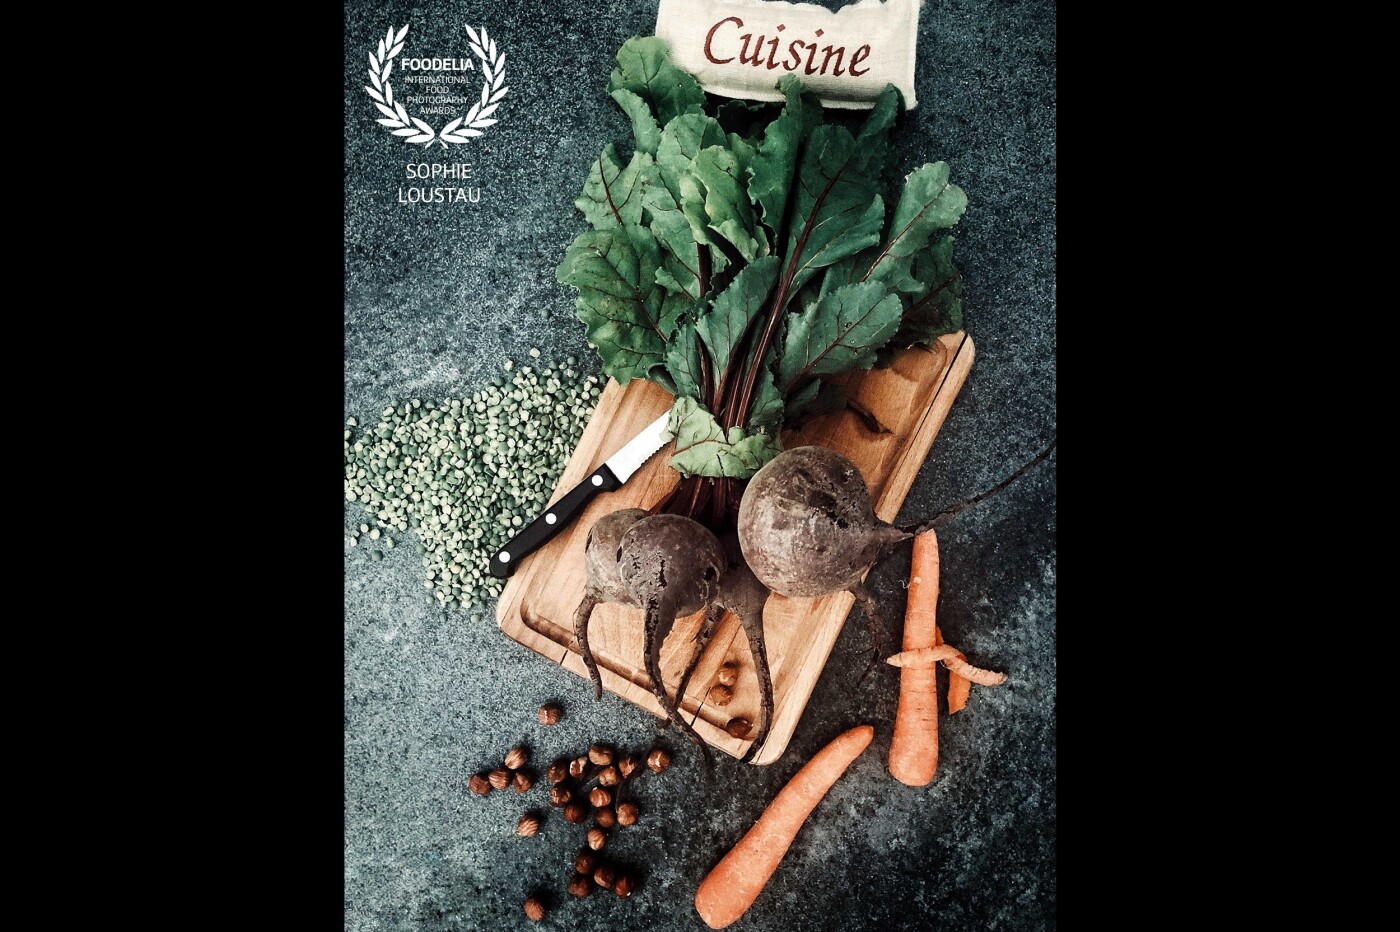 "Beets me" : During confinement at home, cravings for culinary creation, cravings for renewal... So I dreamed in my kitchen of a dish based on beets, lentils, carrots and nuts. The dream came true and it was delicious.  I use the day light ingredients for this photography. 